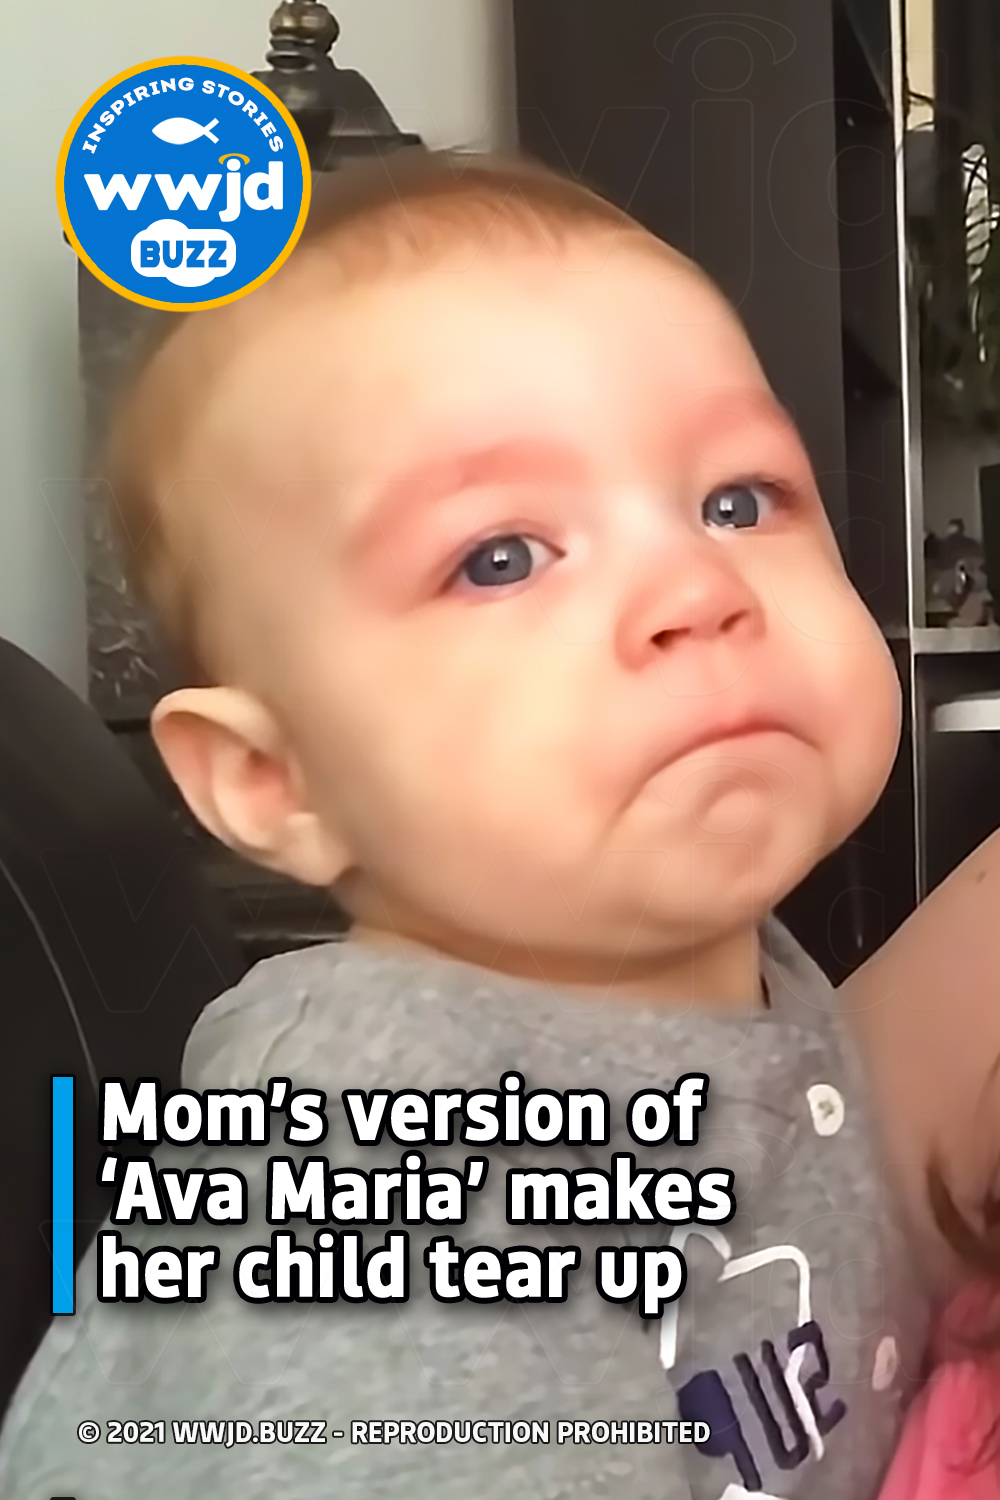 Mom’s version of ‘Ava Maria’ makes her child tear up